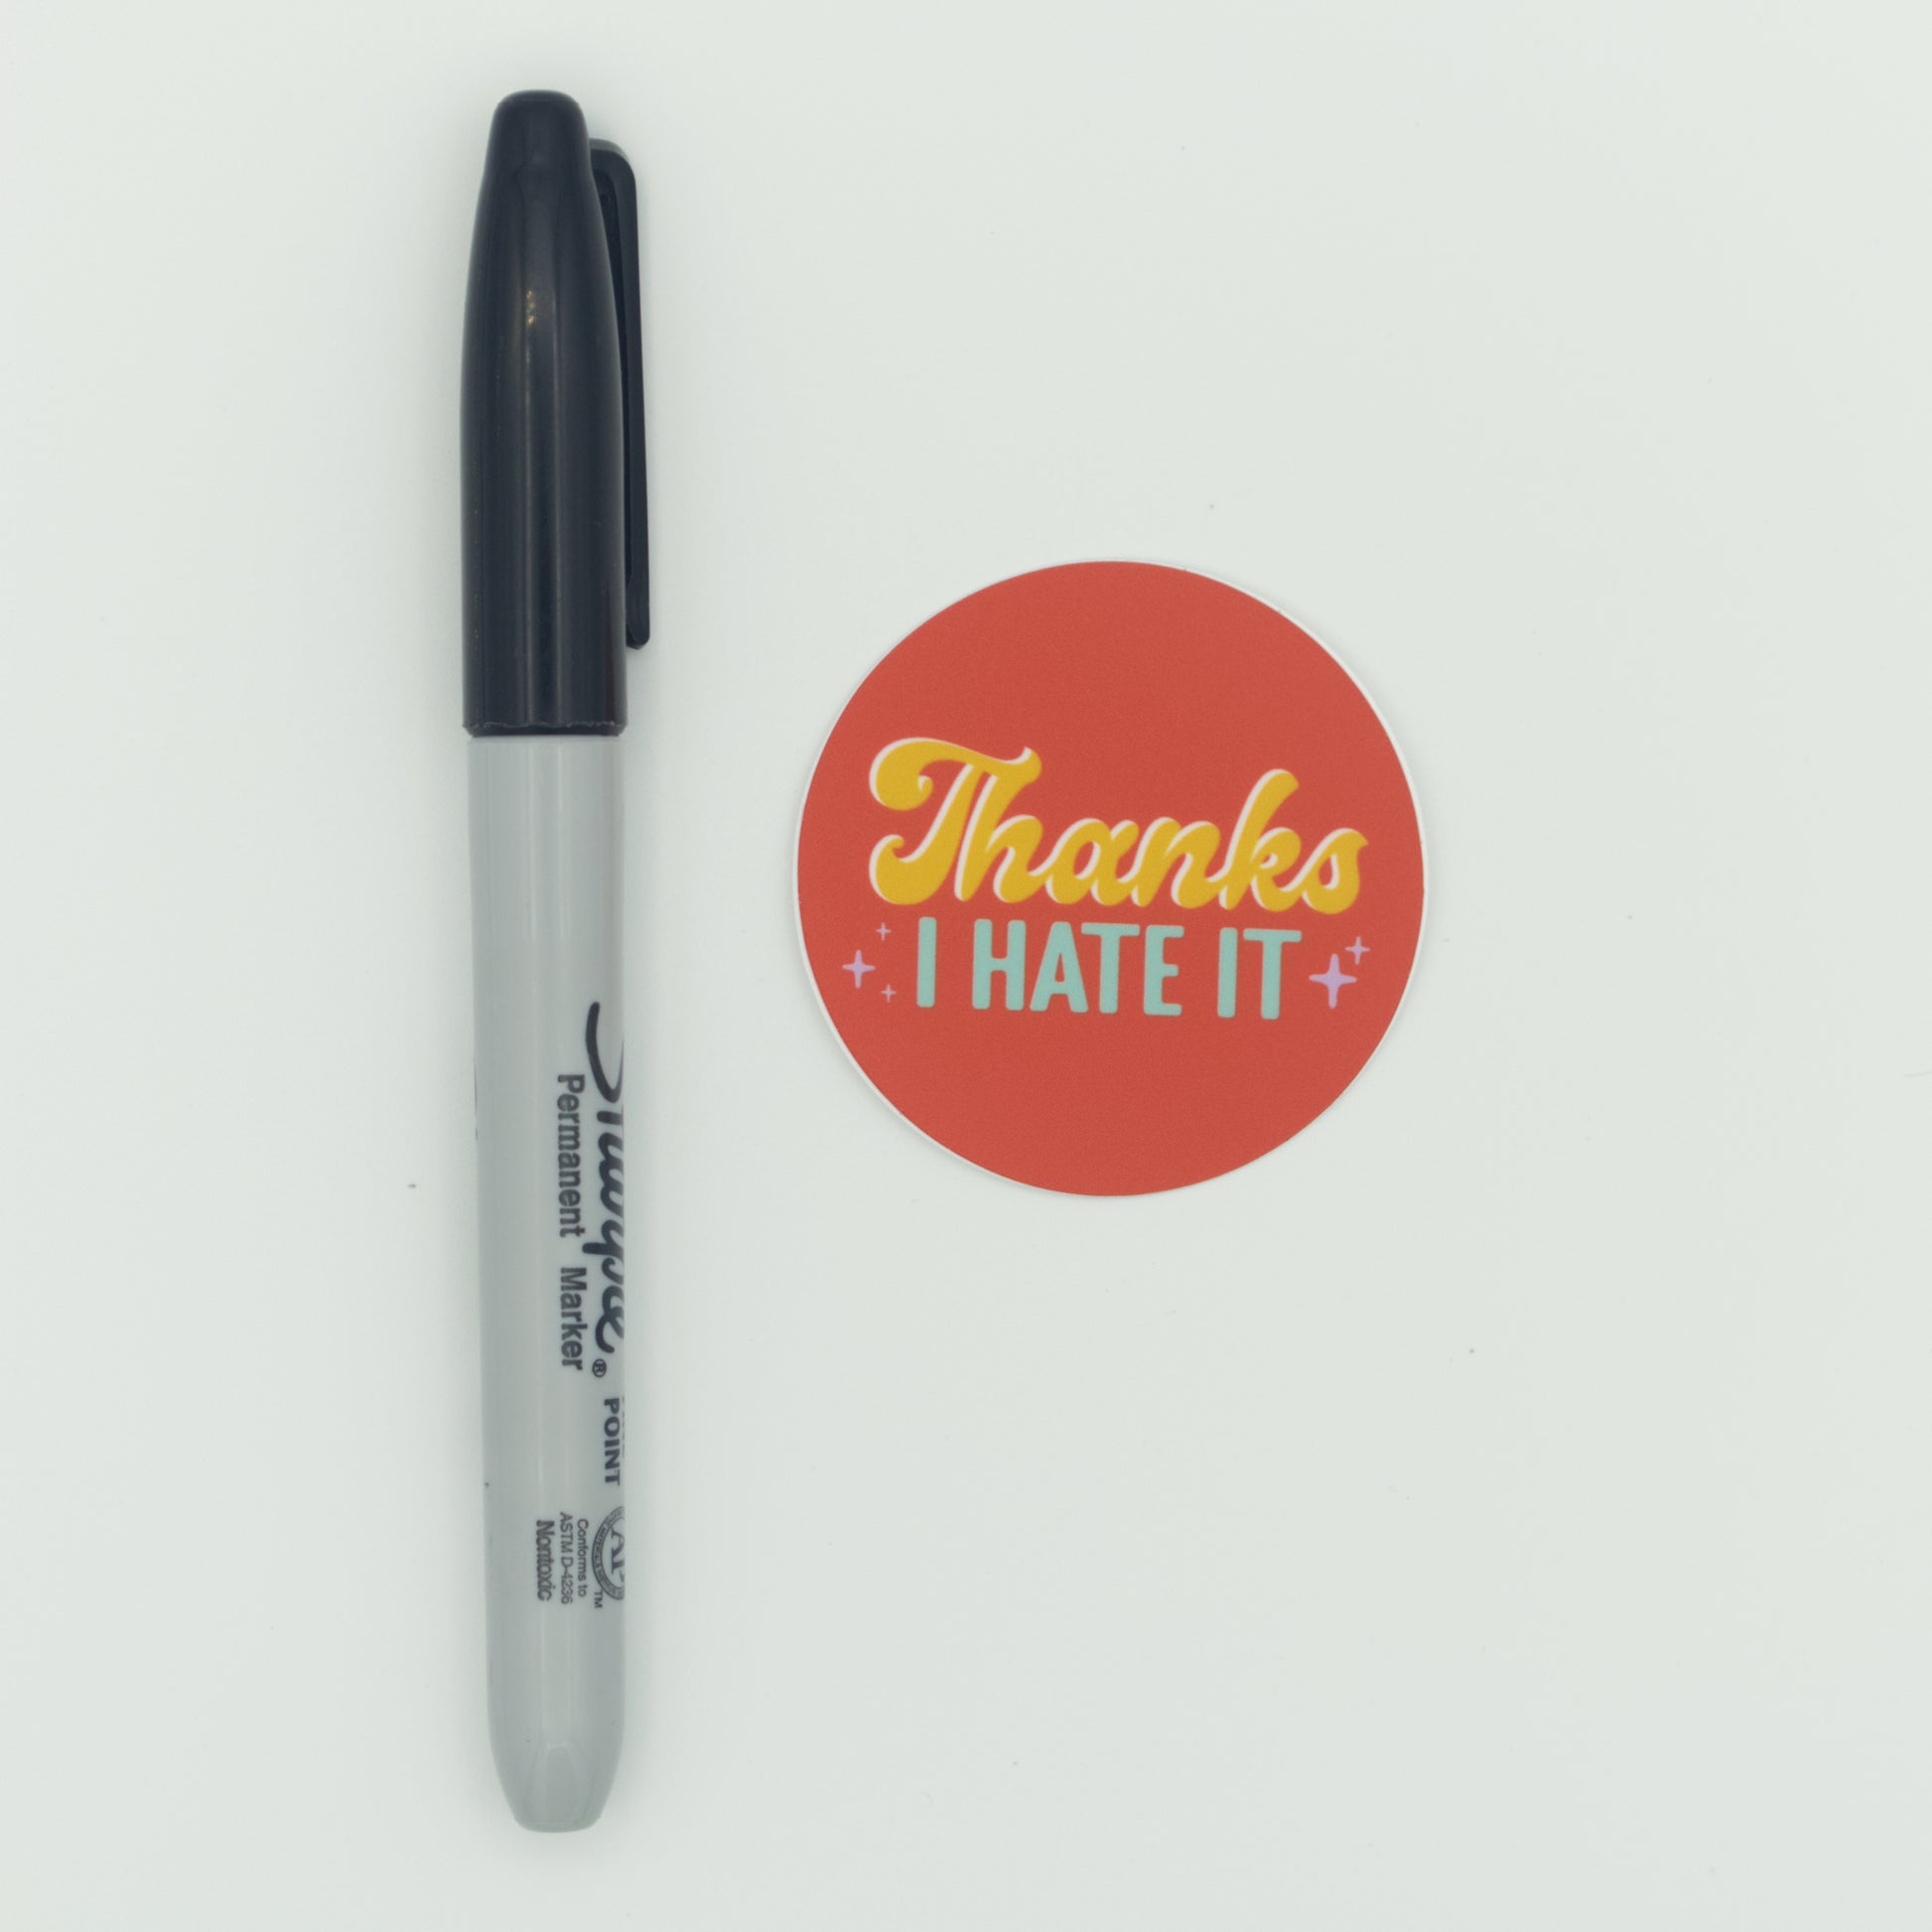 An orange sticker with the words "Thanks I hate it" in yellow and light blue text next to a Sharpie for scale.